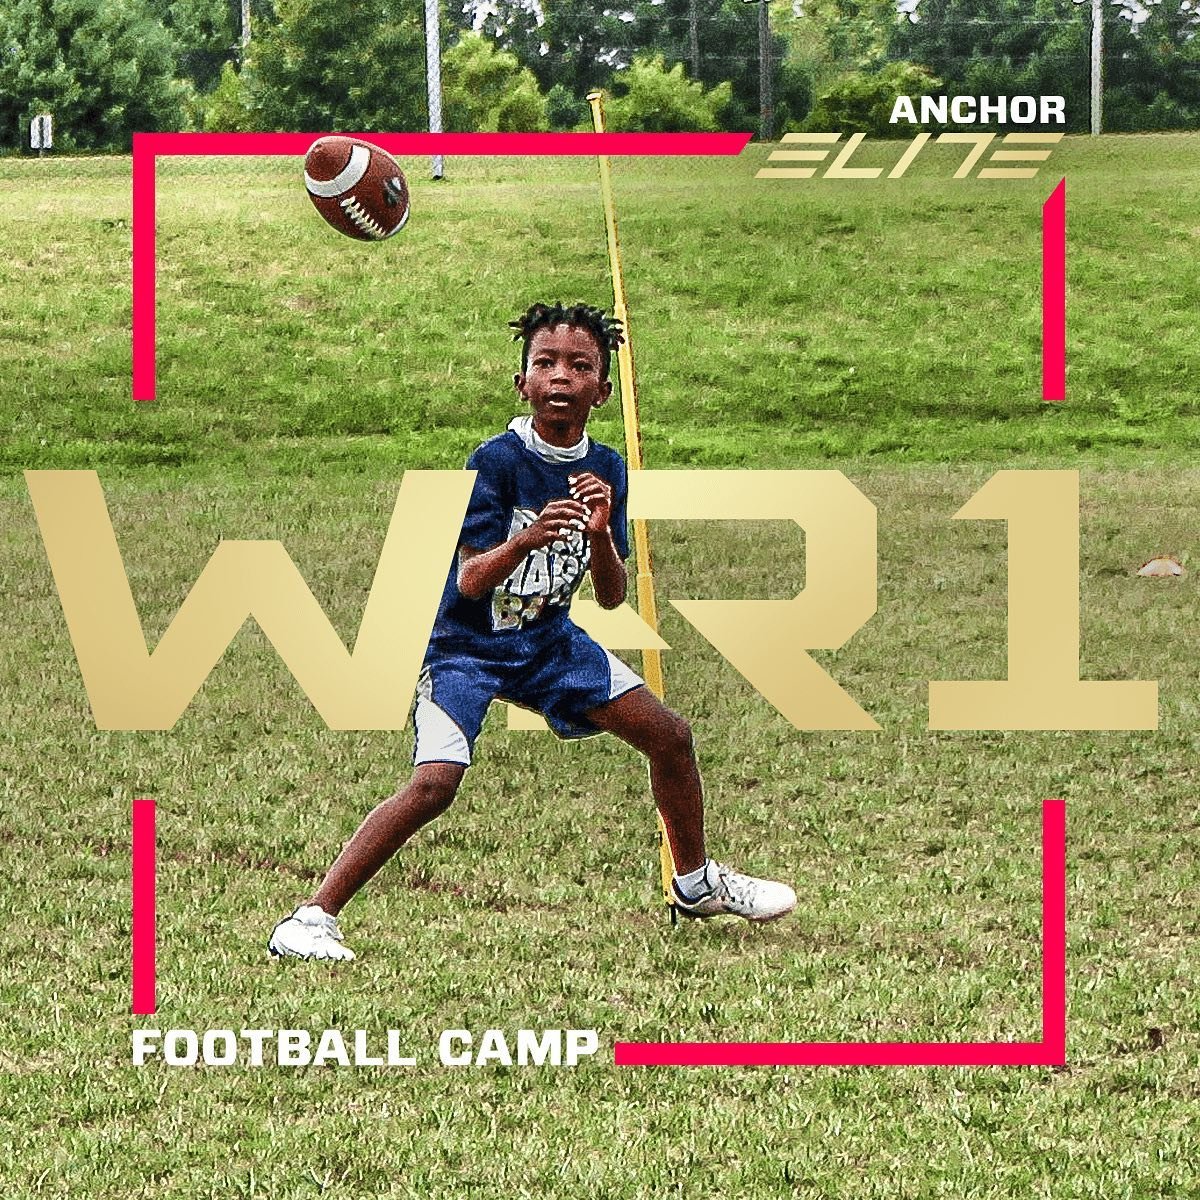 The Anchor Elite Preseason Football Camp! Our WR1 track focuses on hands, route running, speed and agility. This Sunday @johncarrollschool! #linkinbio